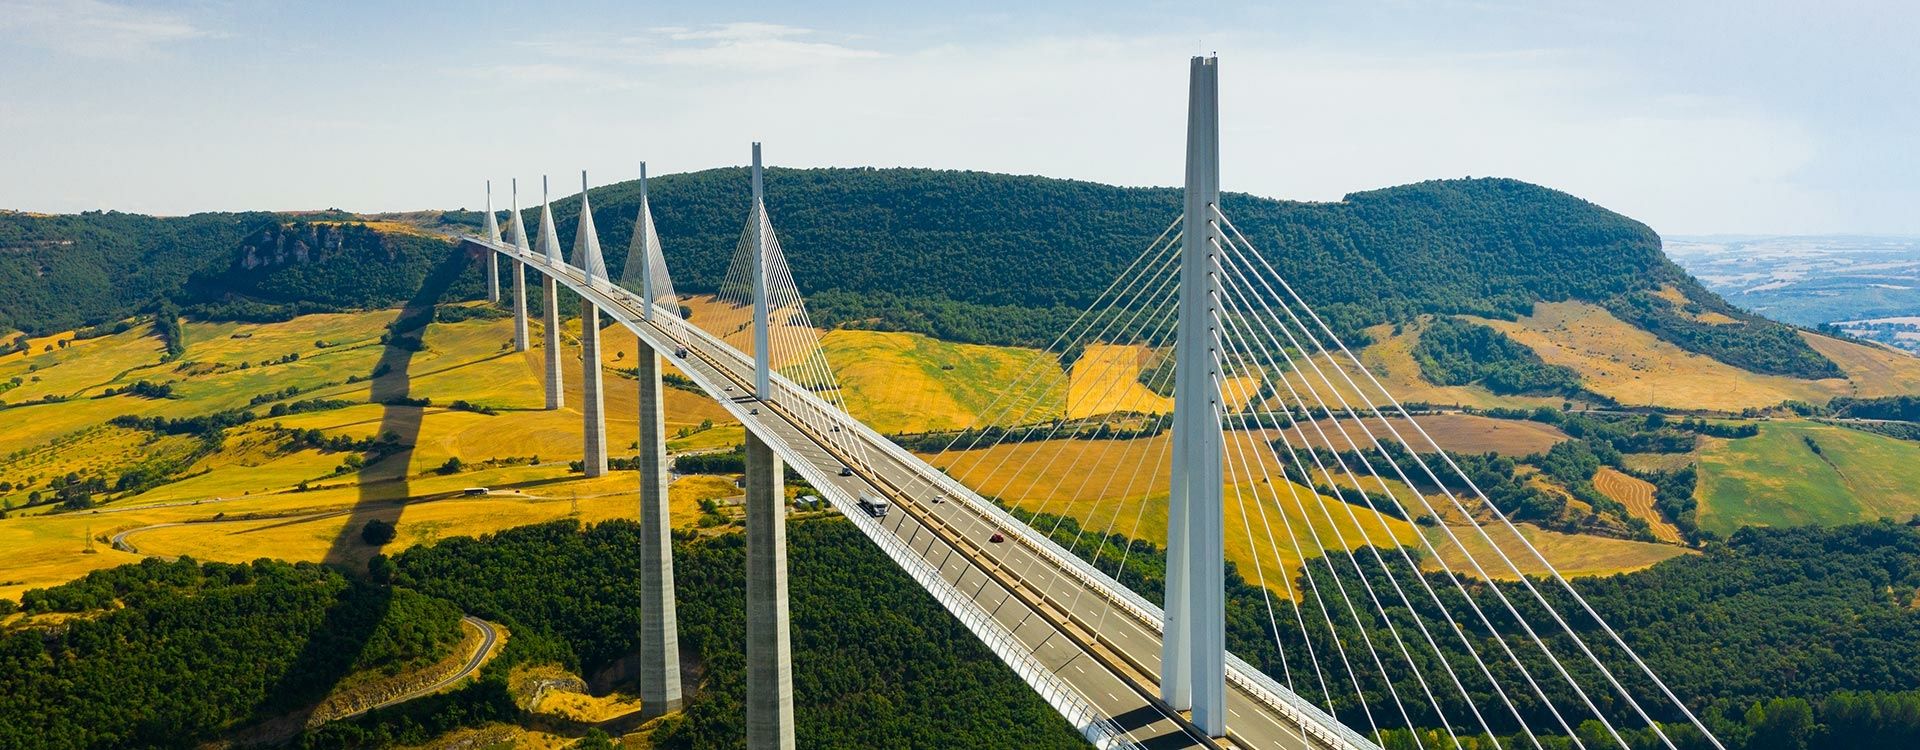 Camping The Millau Viaduct